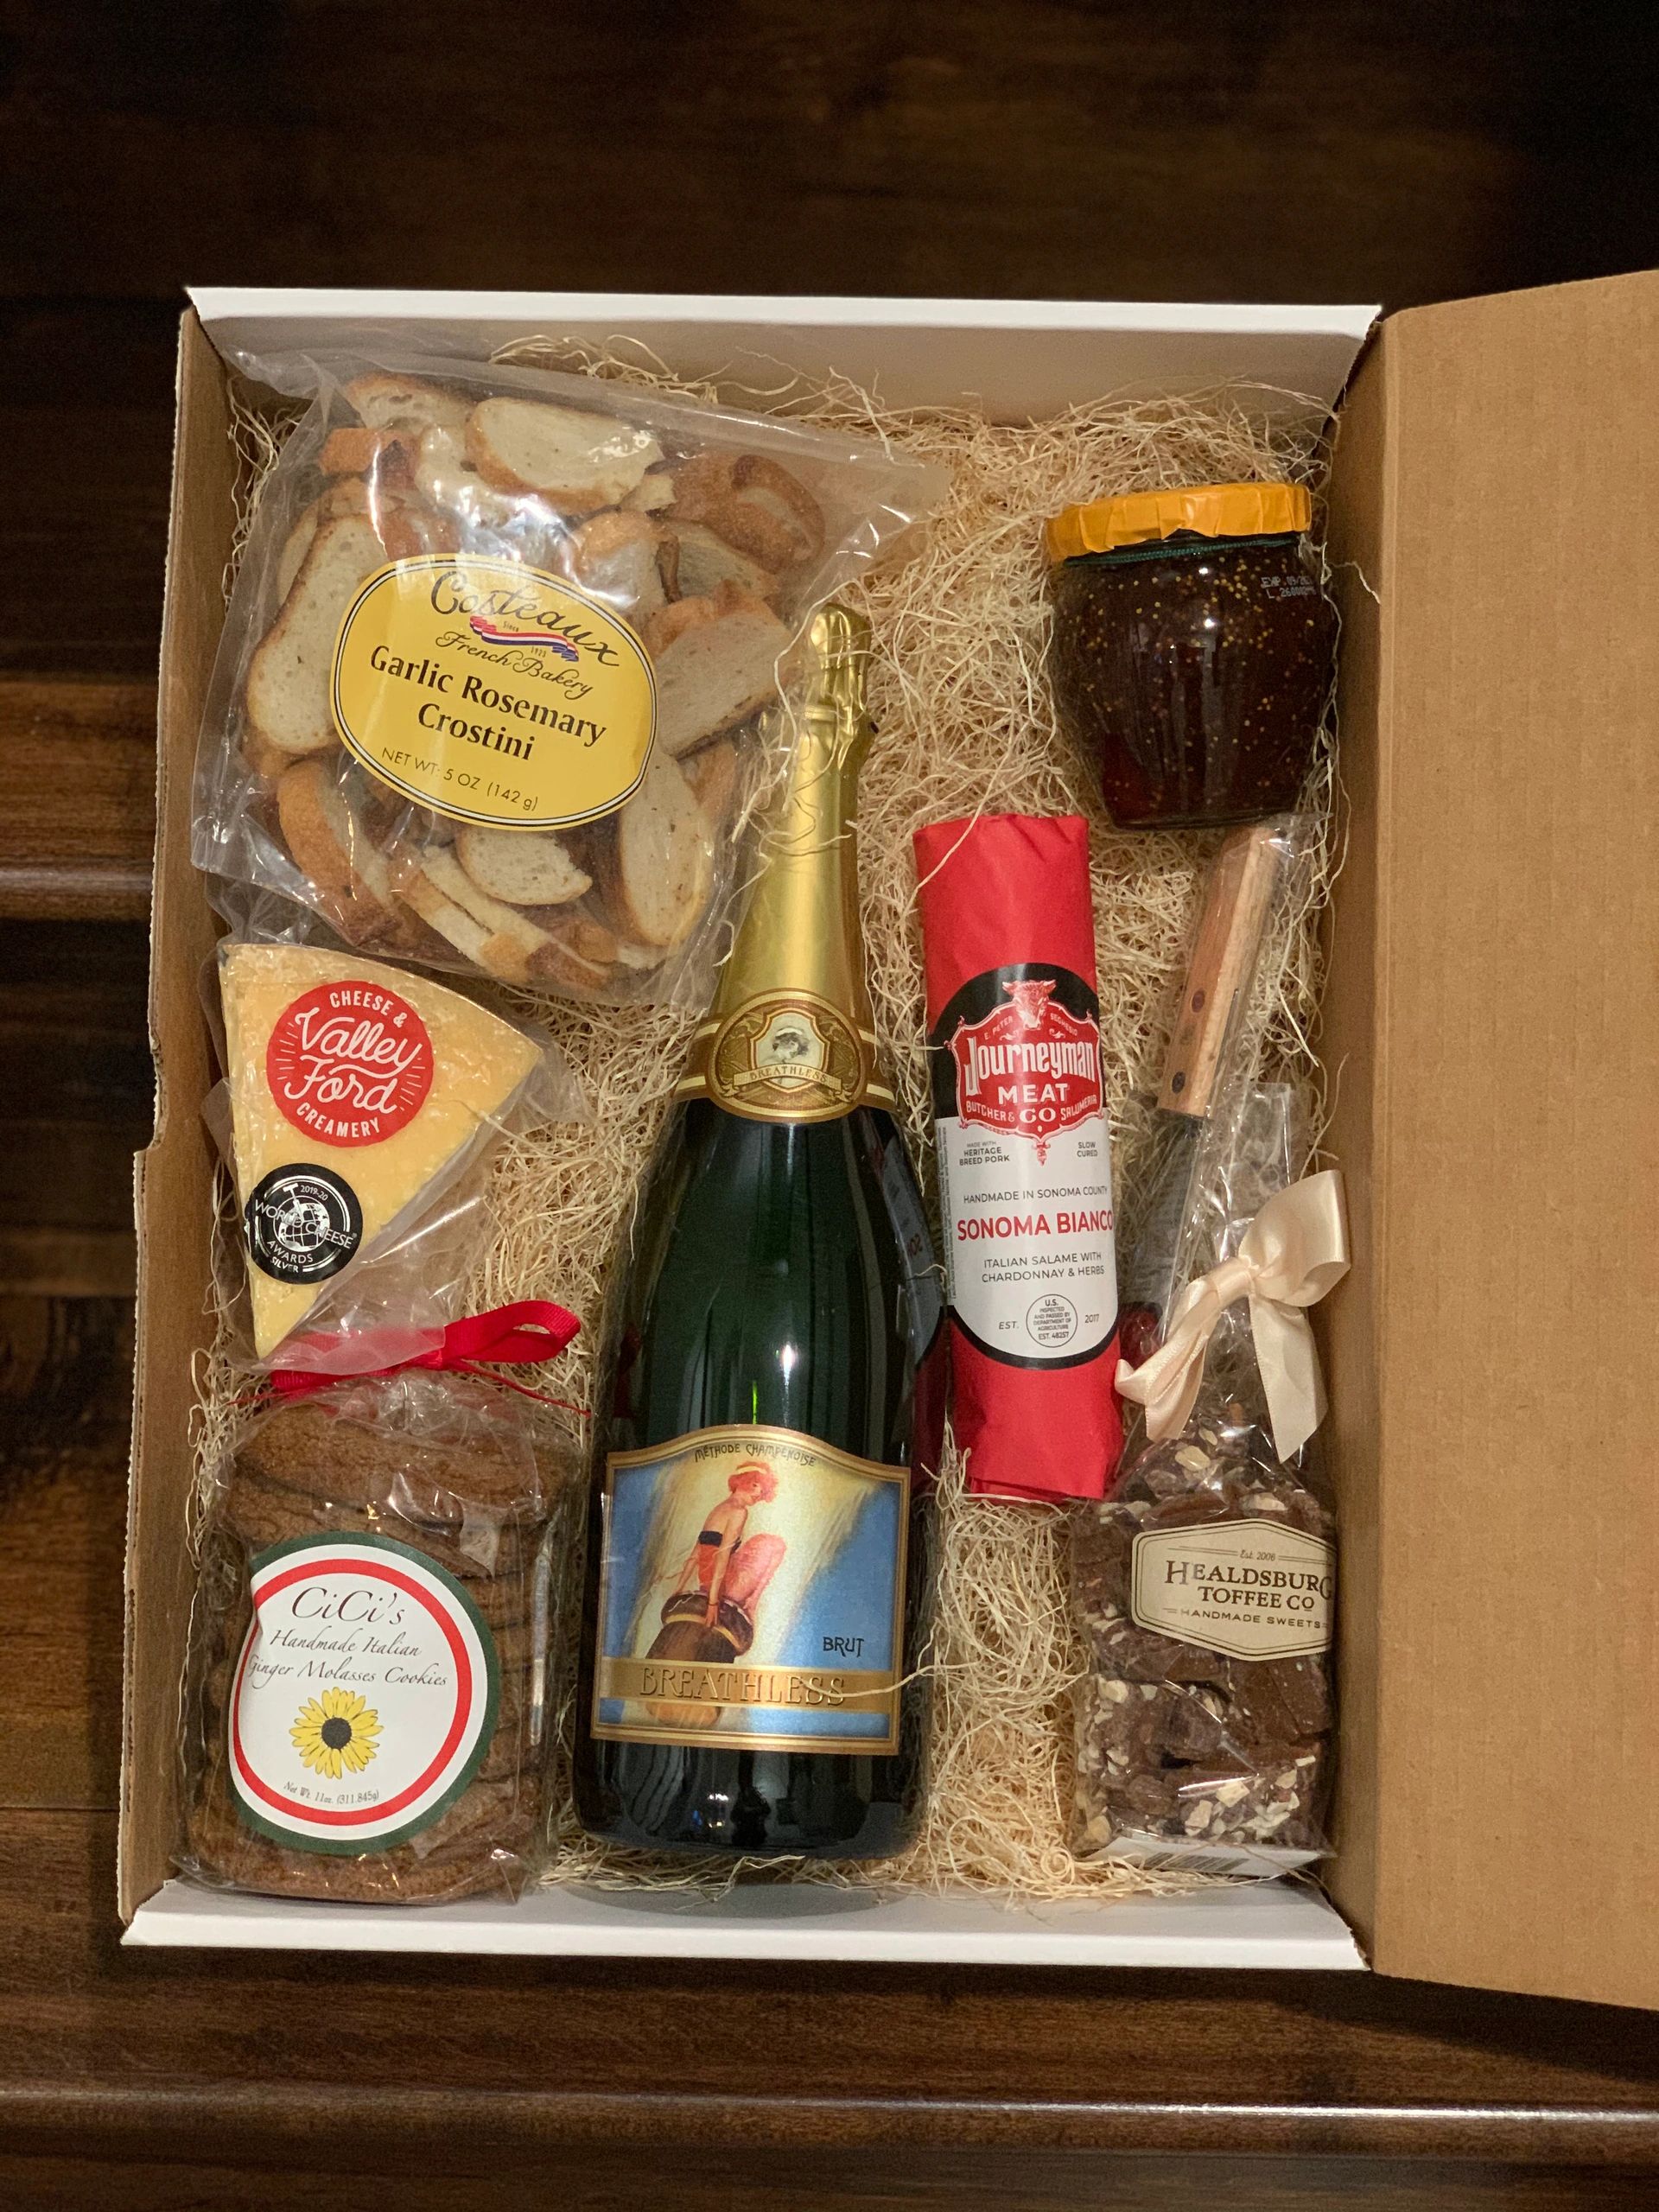 williams sonoma holiday gift baskets